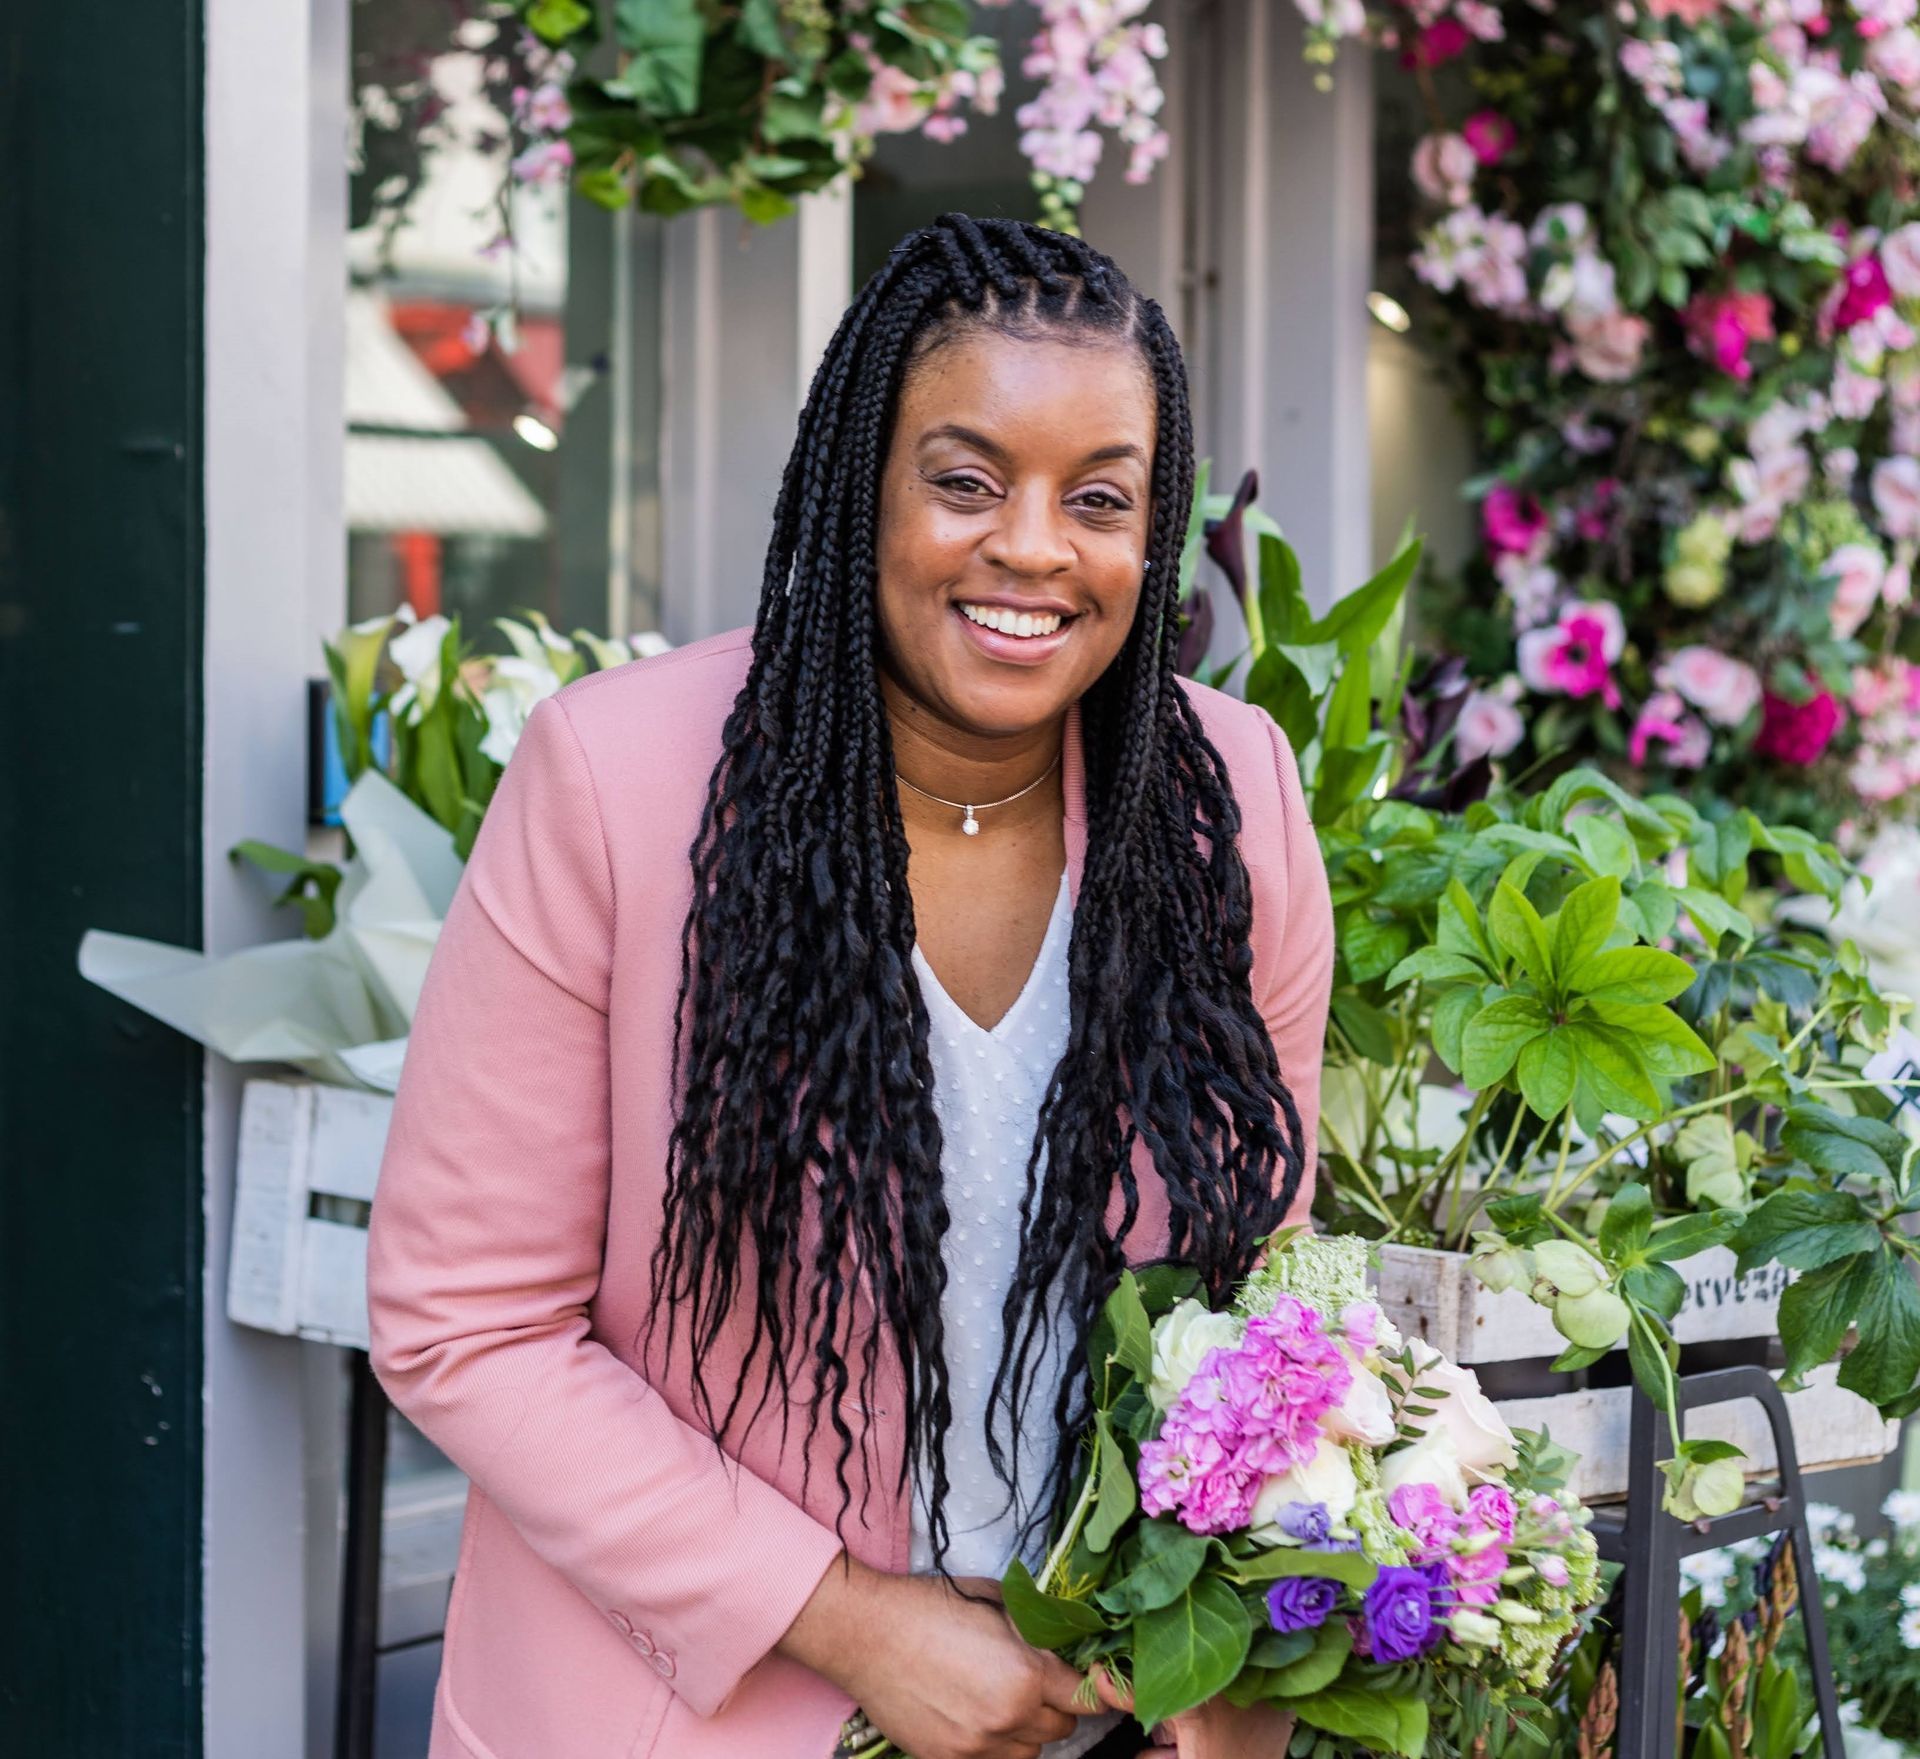 Black woman smiling at camera dressed in peach jacket and holding flowers